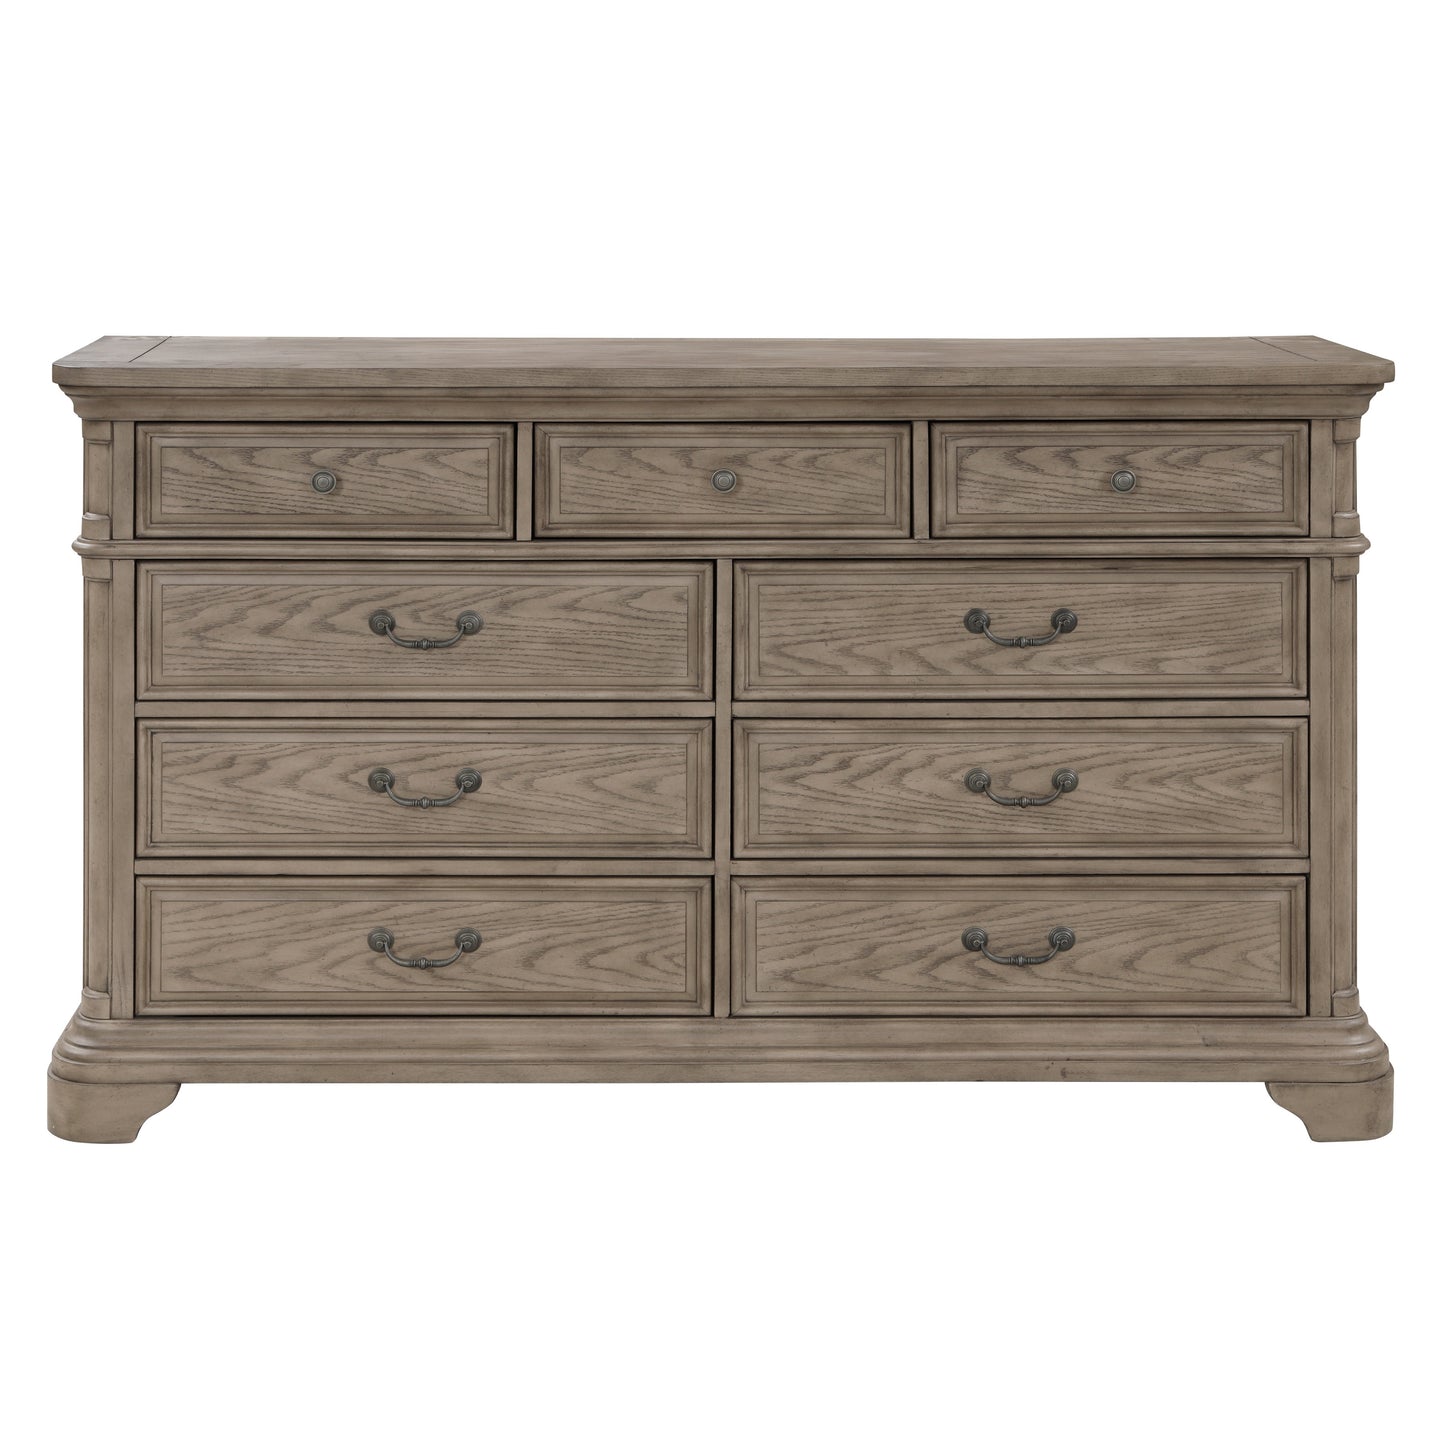 Levan Carved Wood Bedroom Collection, Light Gray